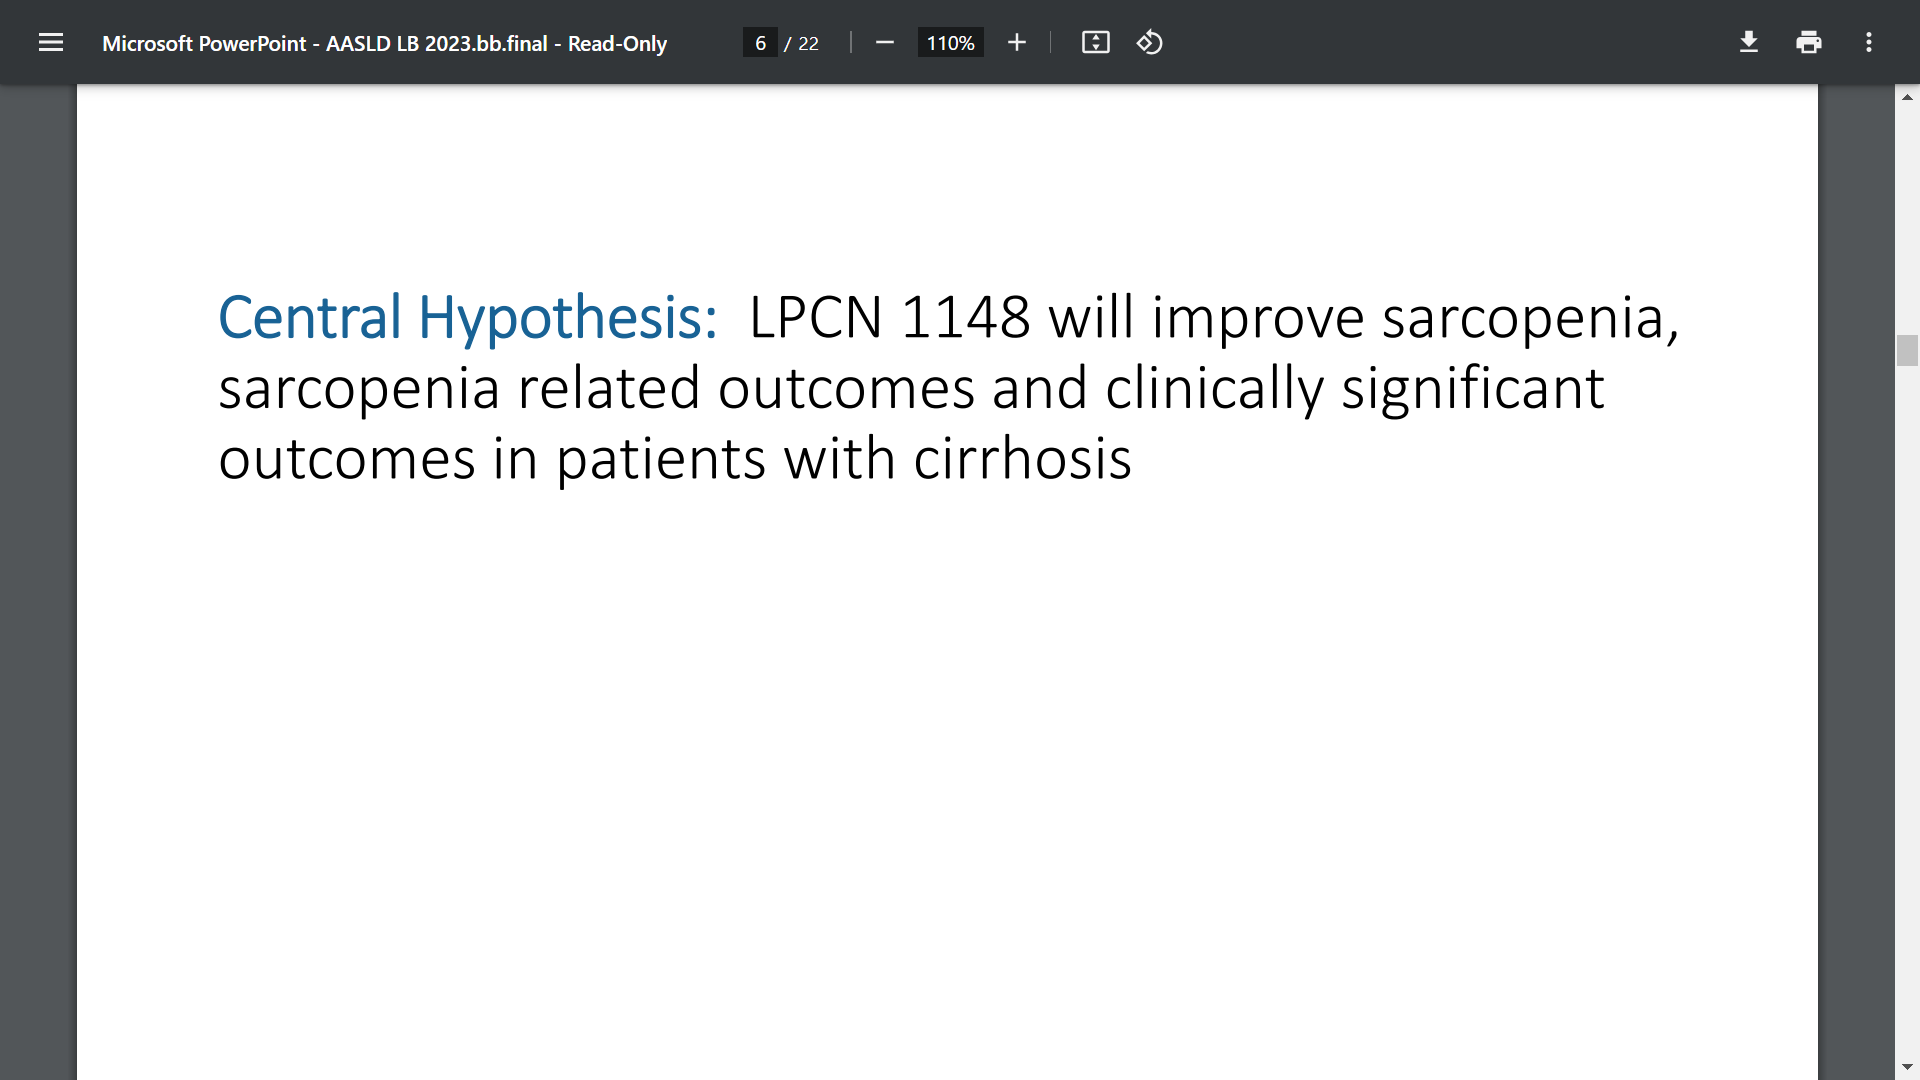 ORAL LPCN 1148 IMPROVES SARCOPENIA AND CLINICAL OUTCOMES INPATIENTS ...